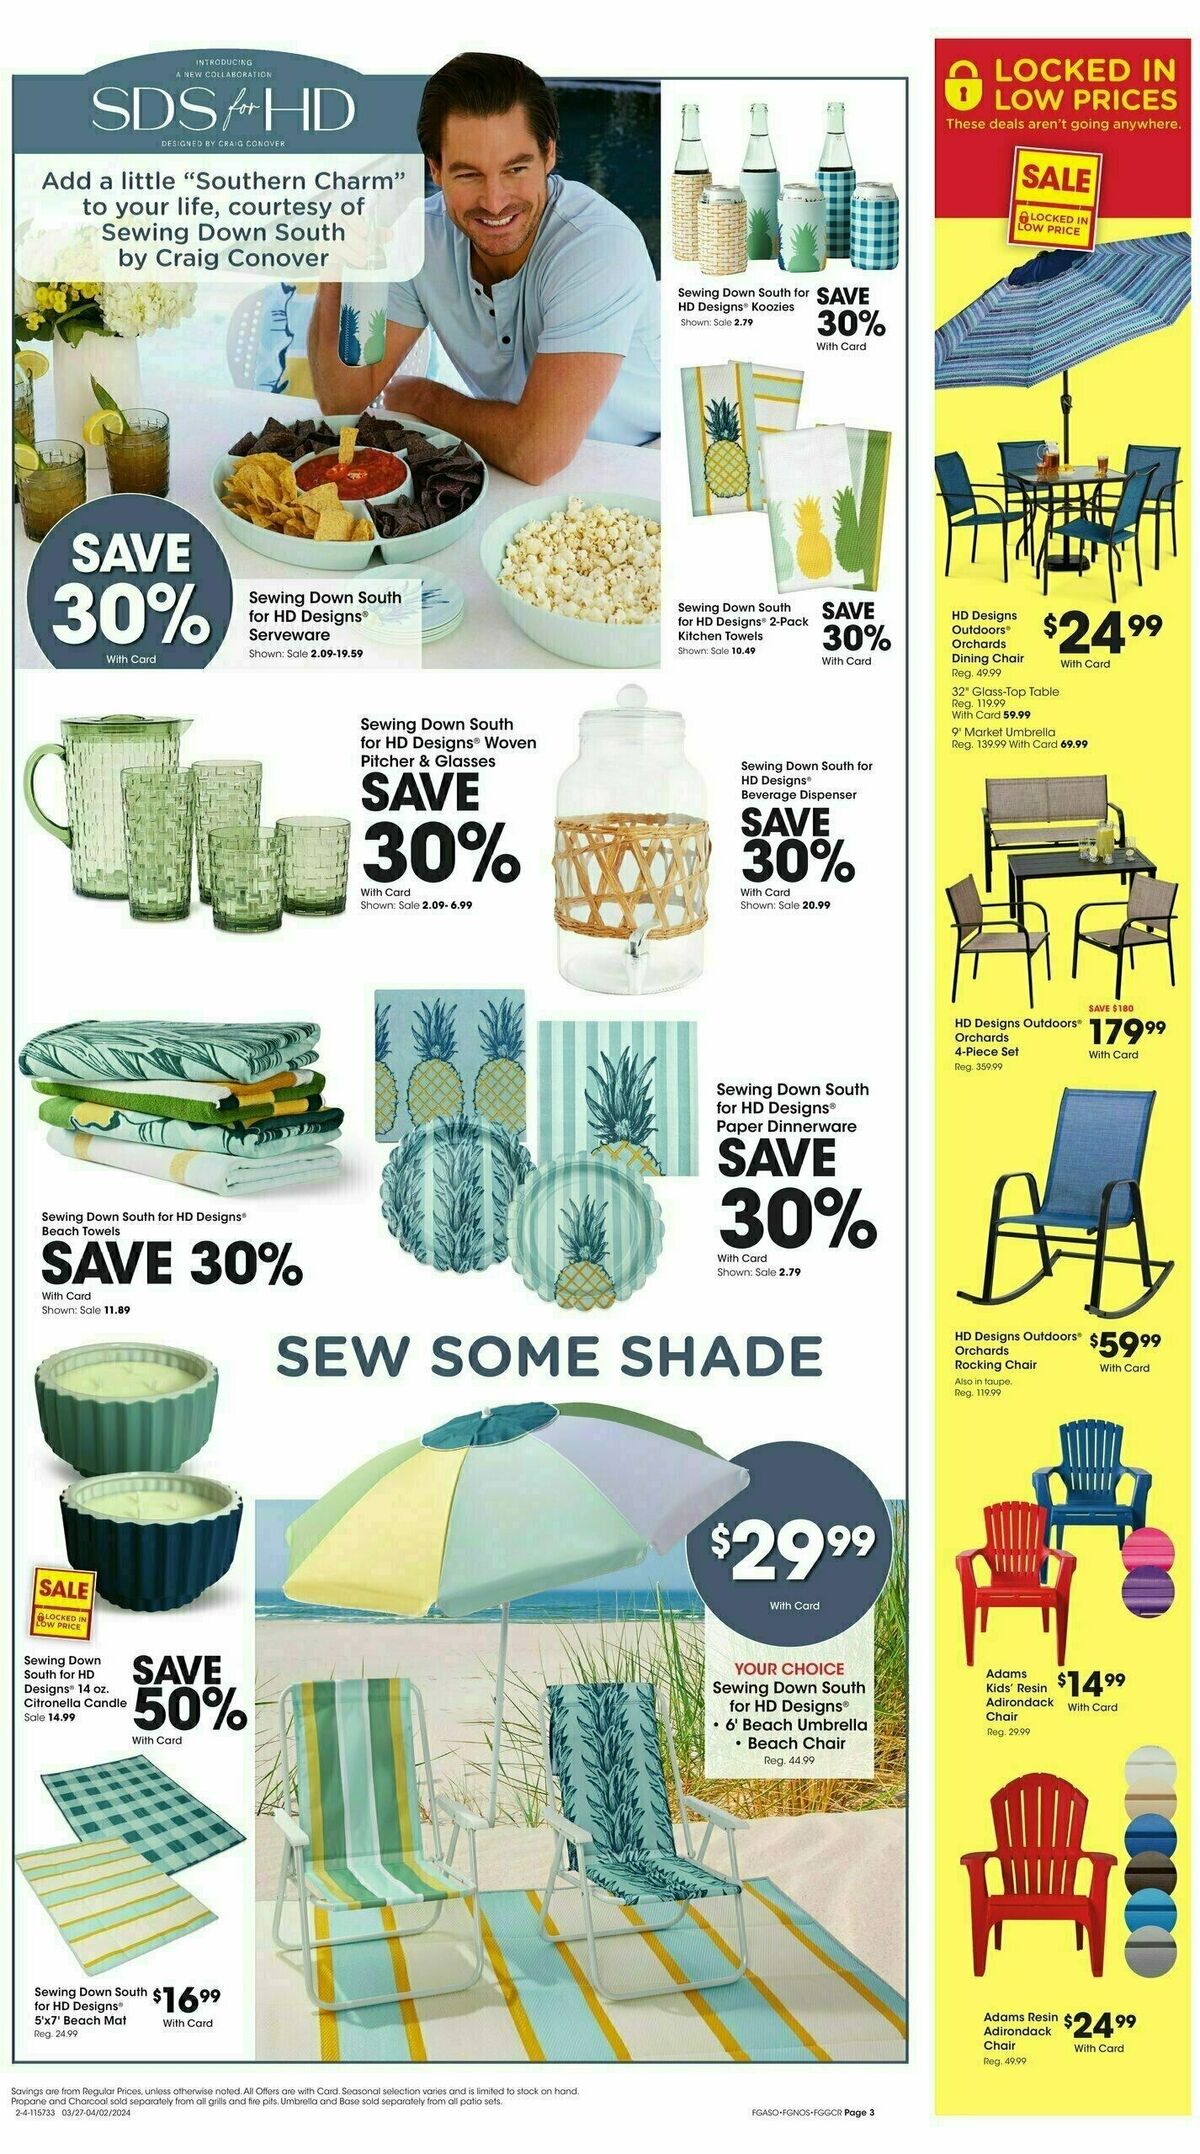 Fred Meyer Garden Center Weekly Ad from March 27